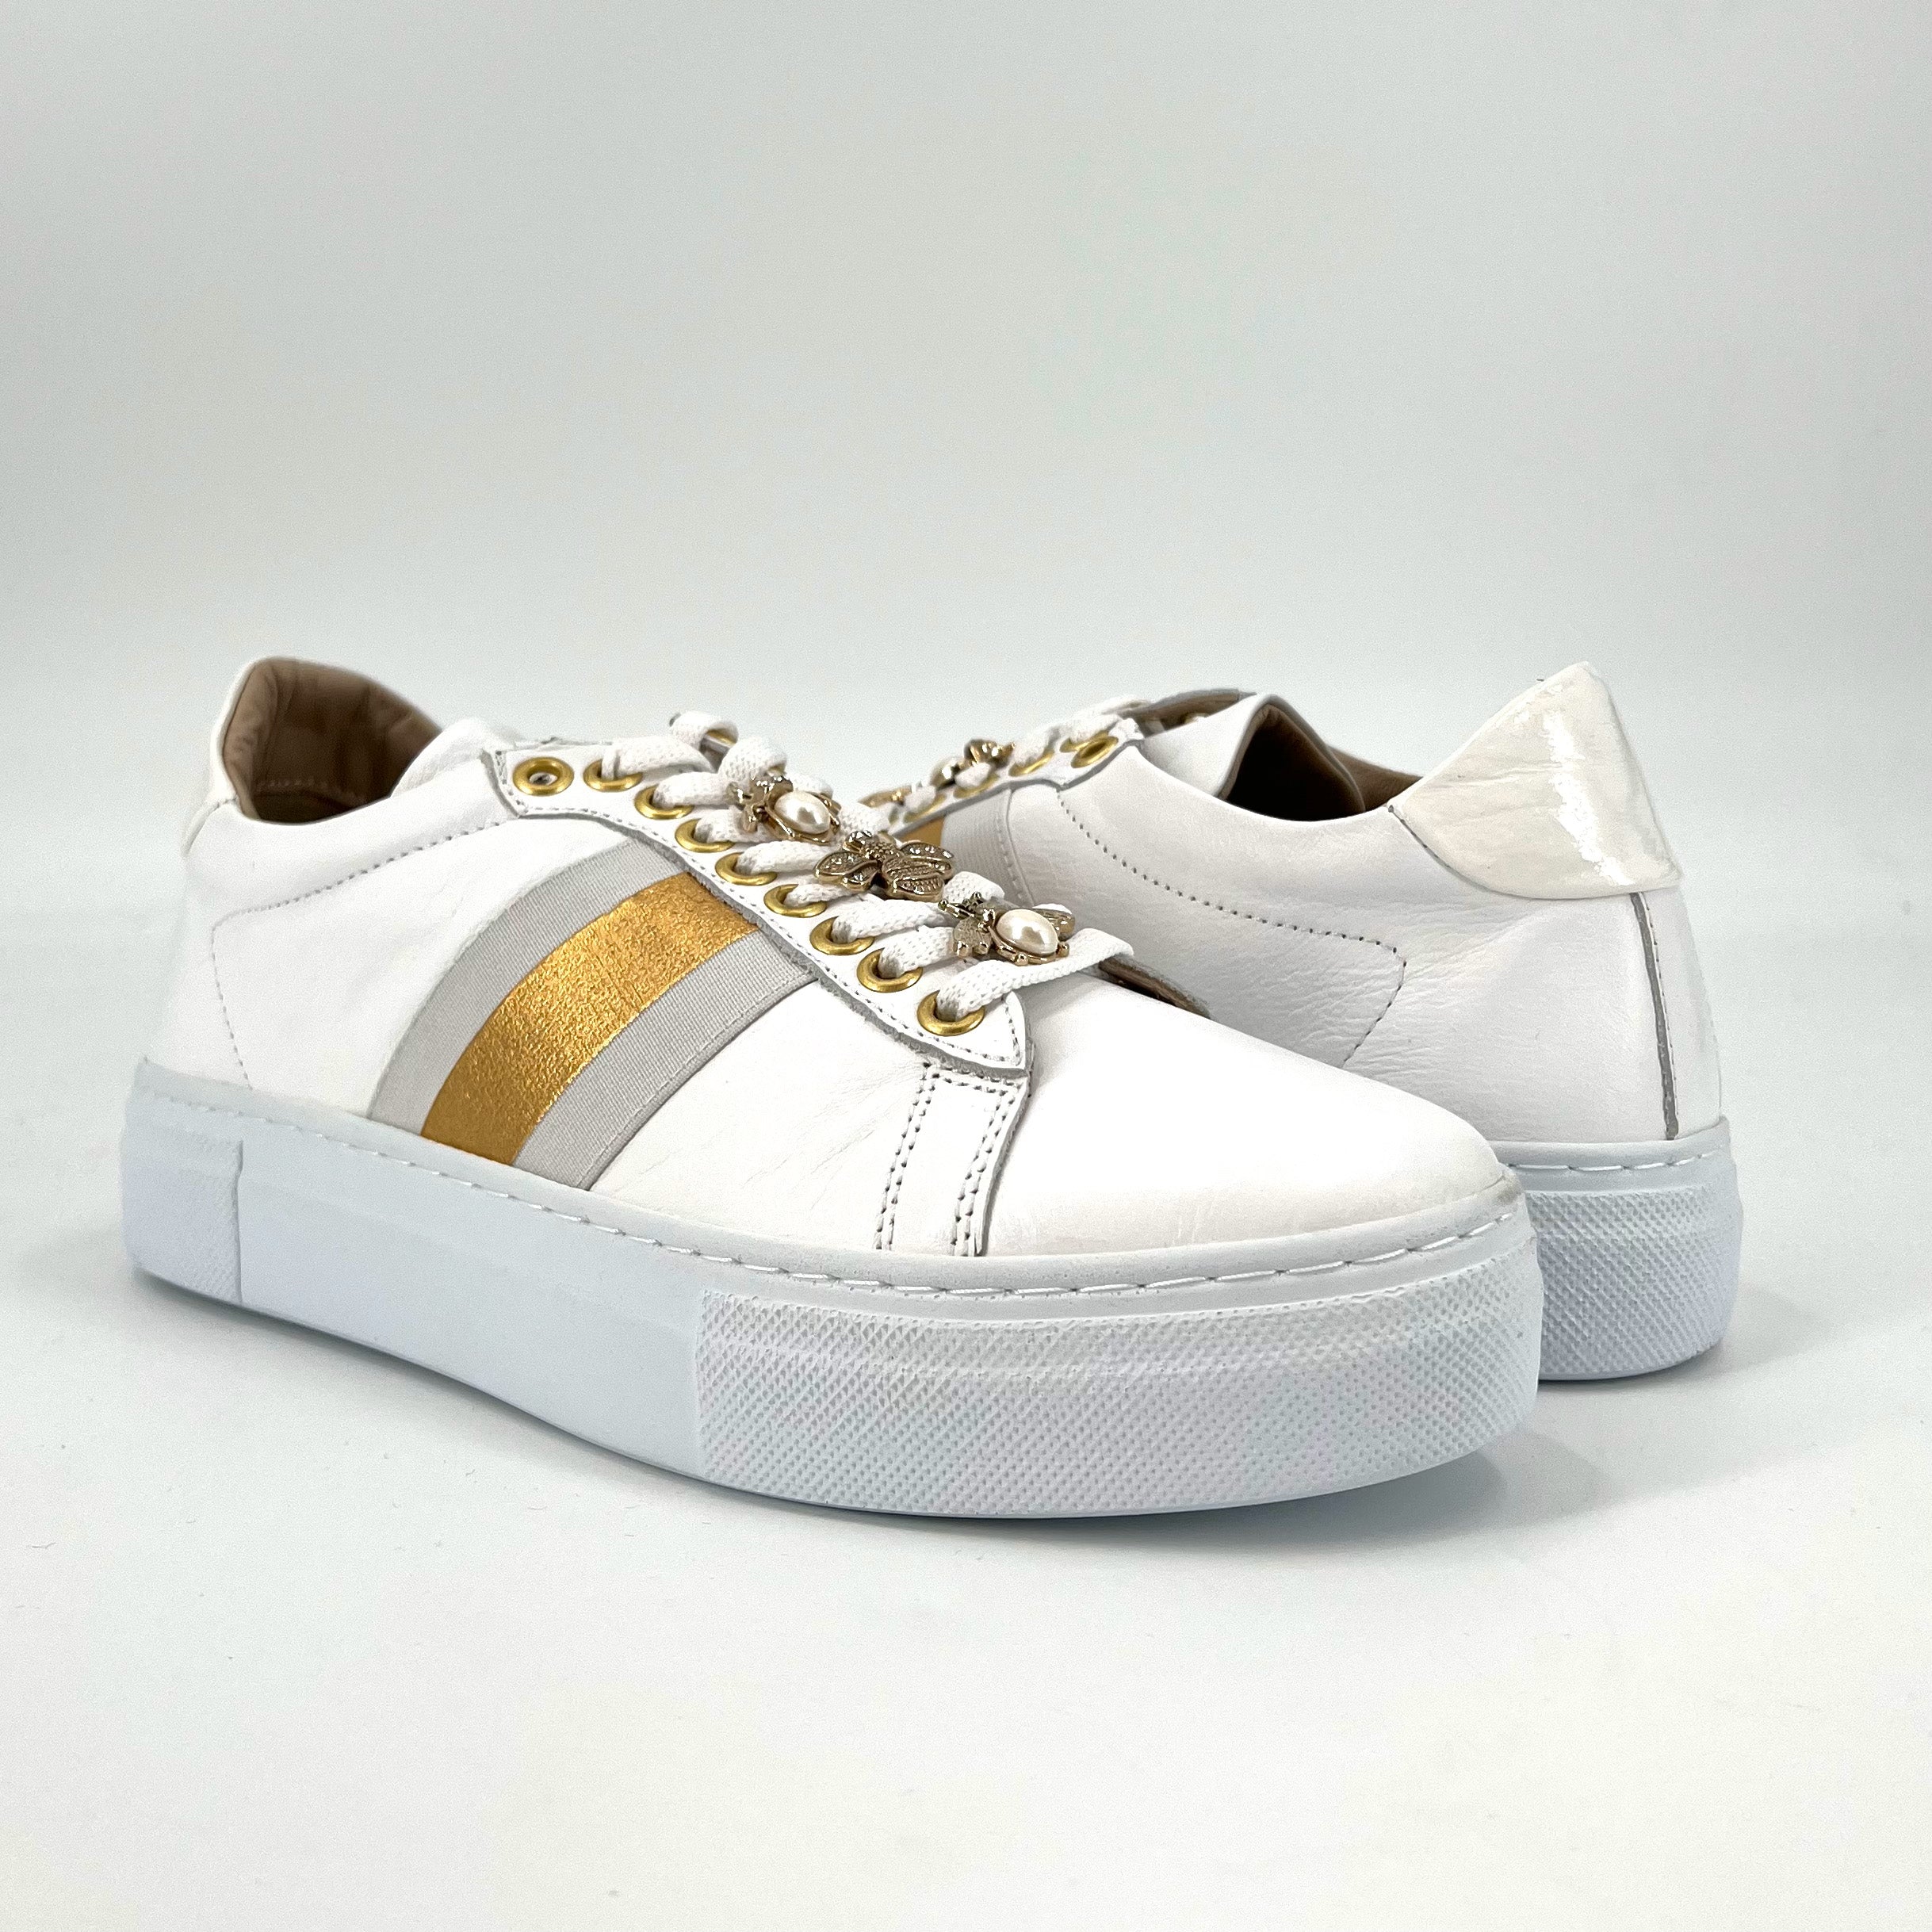 The Lace Sneaker with Bug Ornaments in White